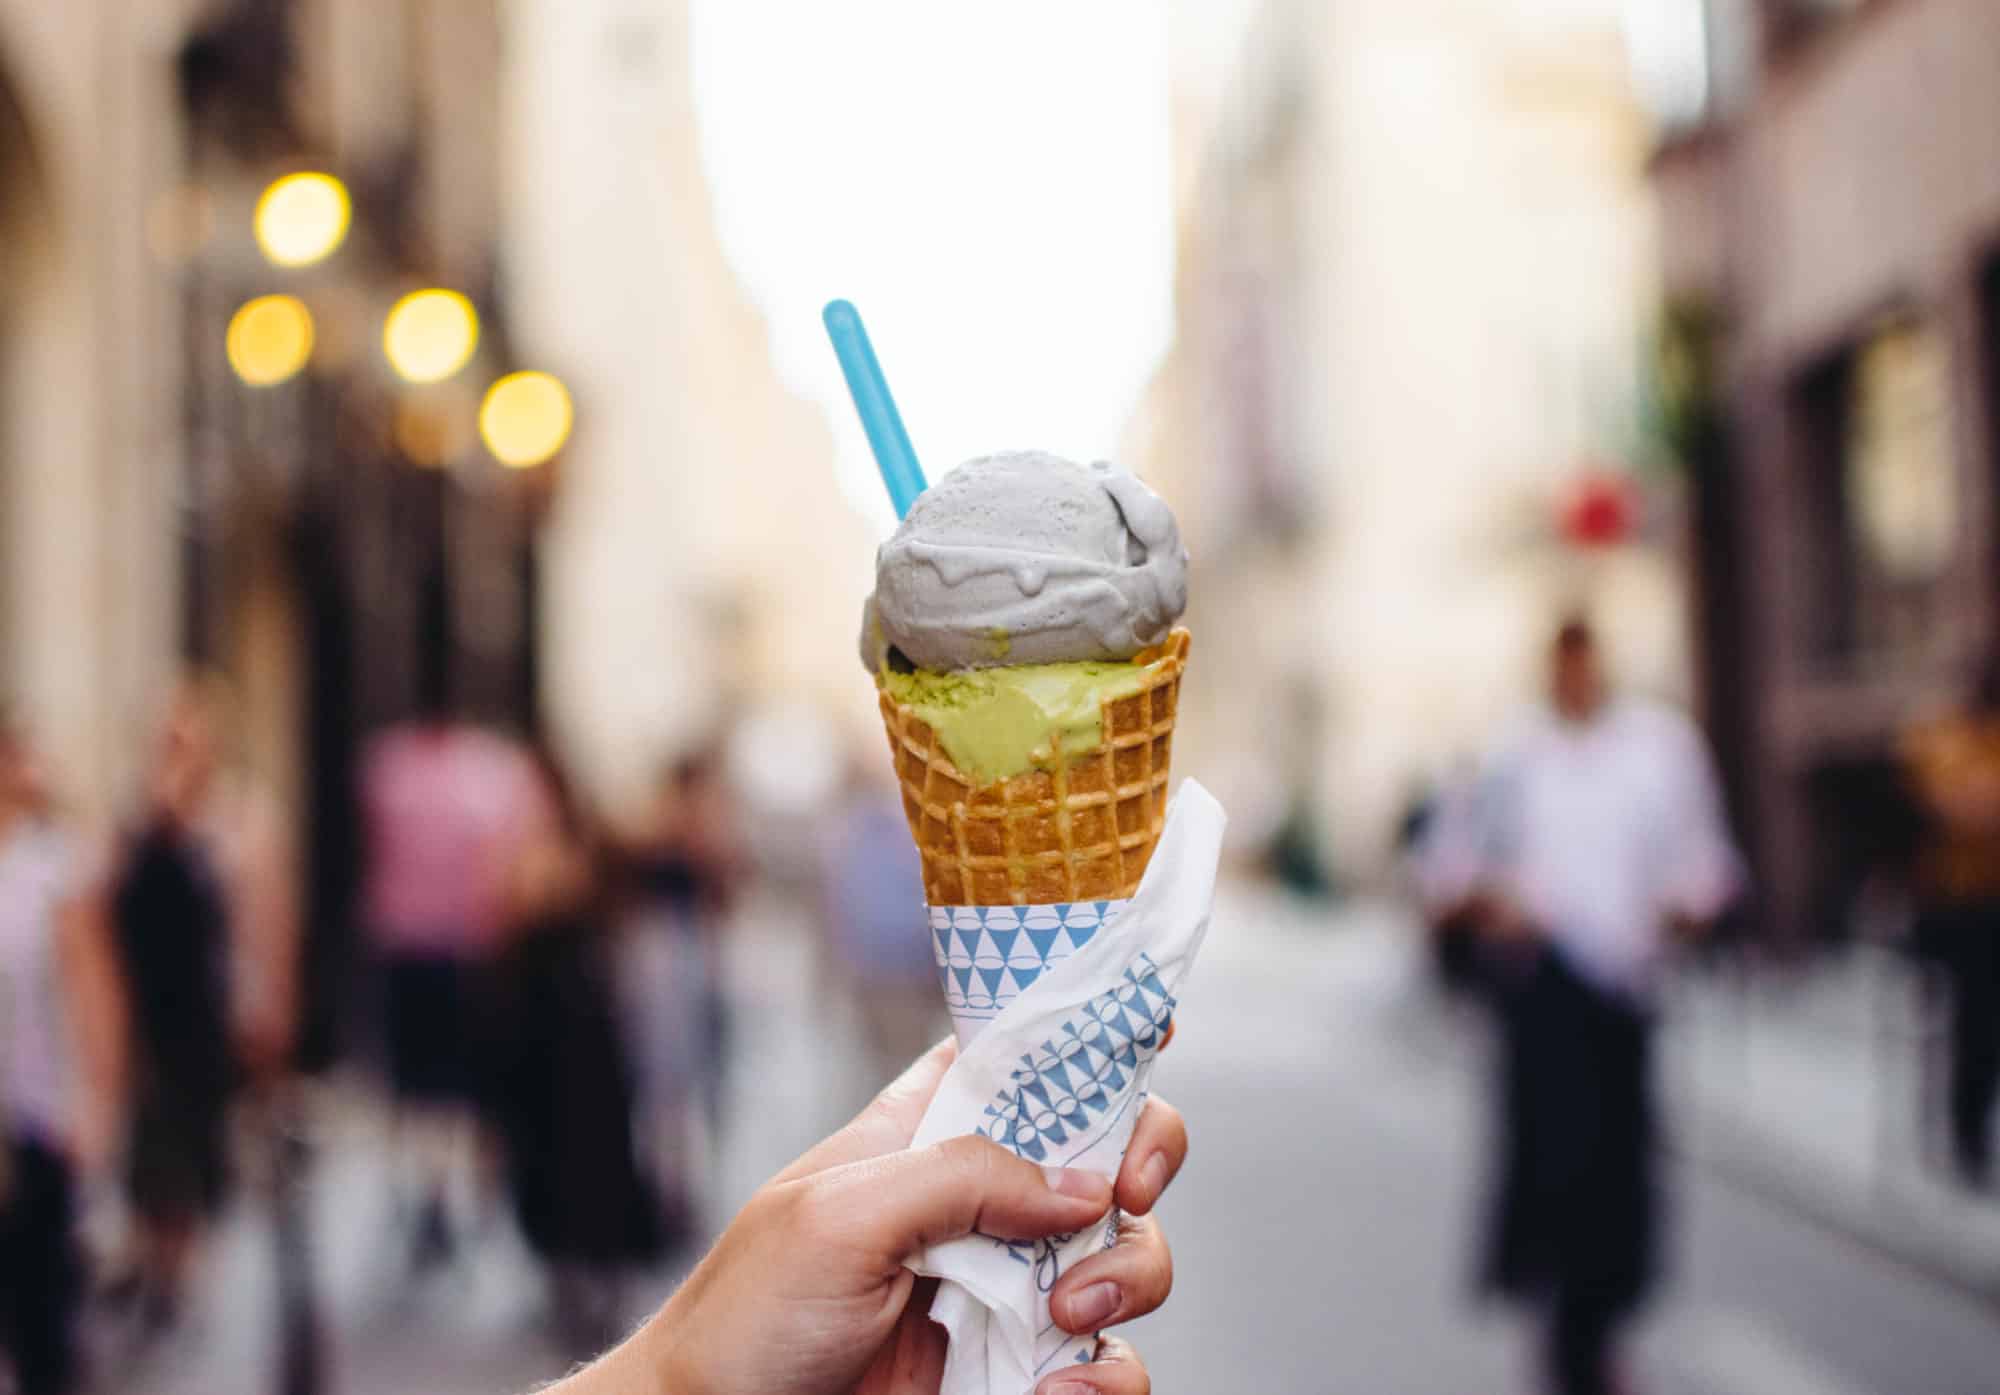 Two scoops of ice cream fro mUne Glace à Paris beingheld up by a person's hand in the streets of Paris.